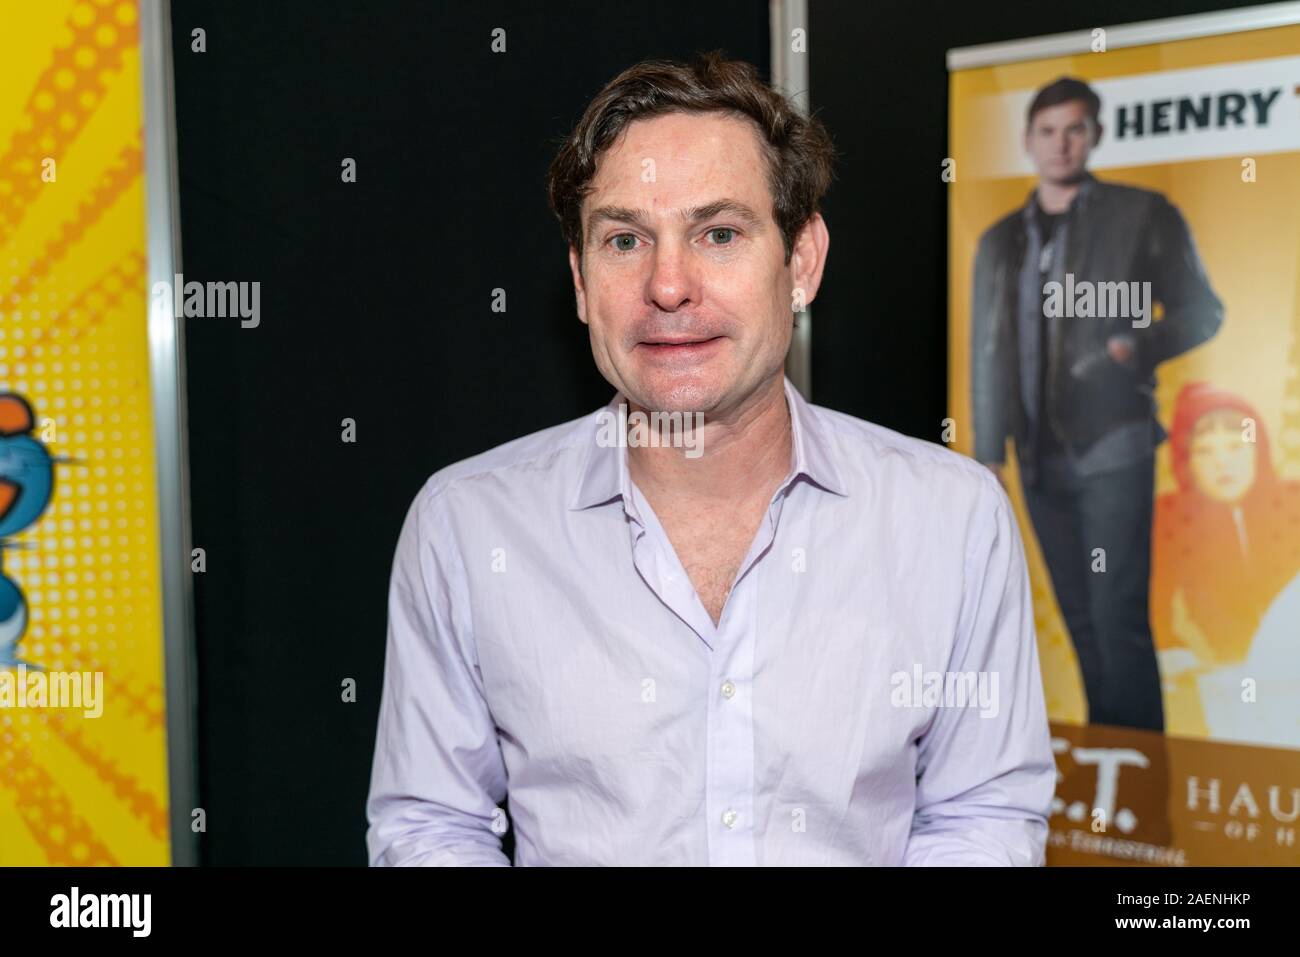 DORTMUND, GERMANY - December 8th 2019: Henry Thomas (*1971, American actor and musician - E.T., Haunting, Psycho IV) at German Comic Con Dortmund, a two day fan convention Stock Photo